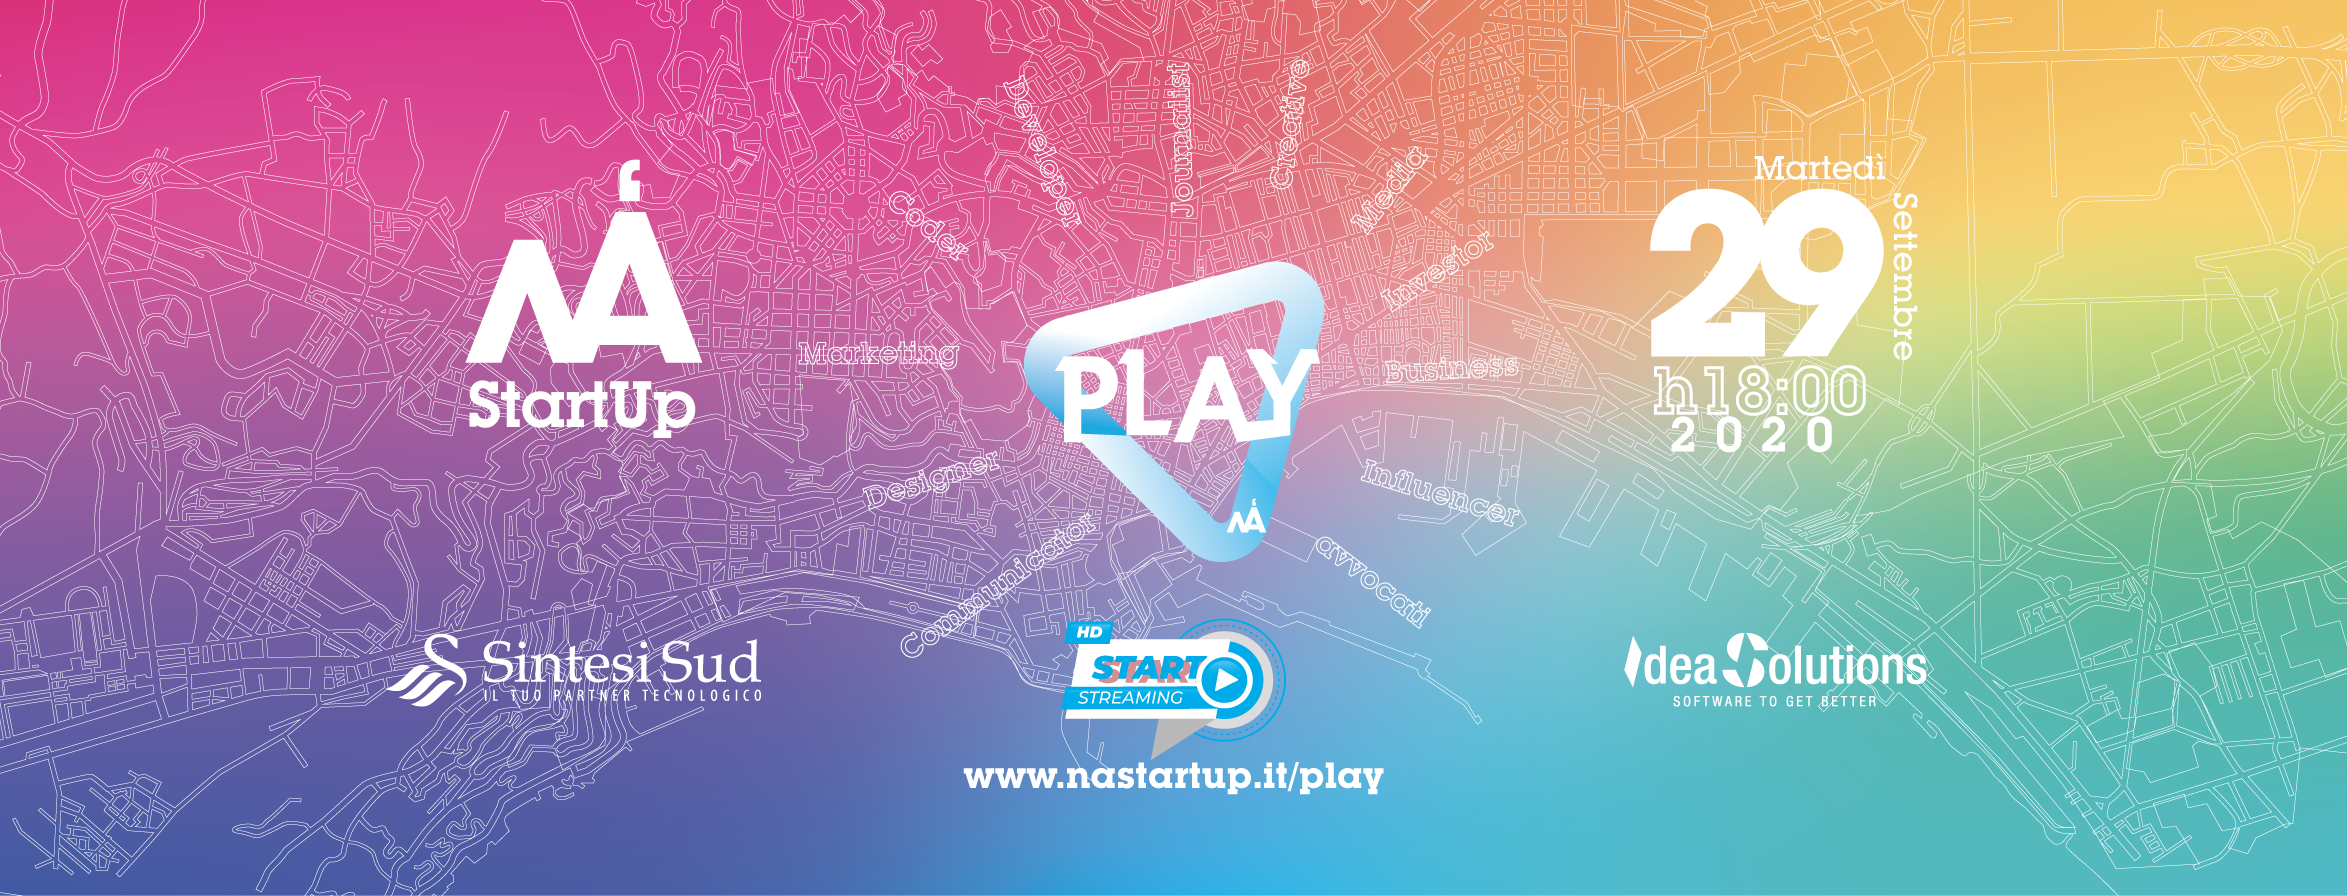 StartUp Play 006 Settembre2020